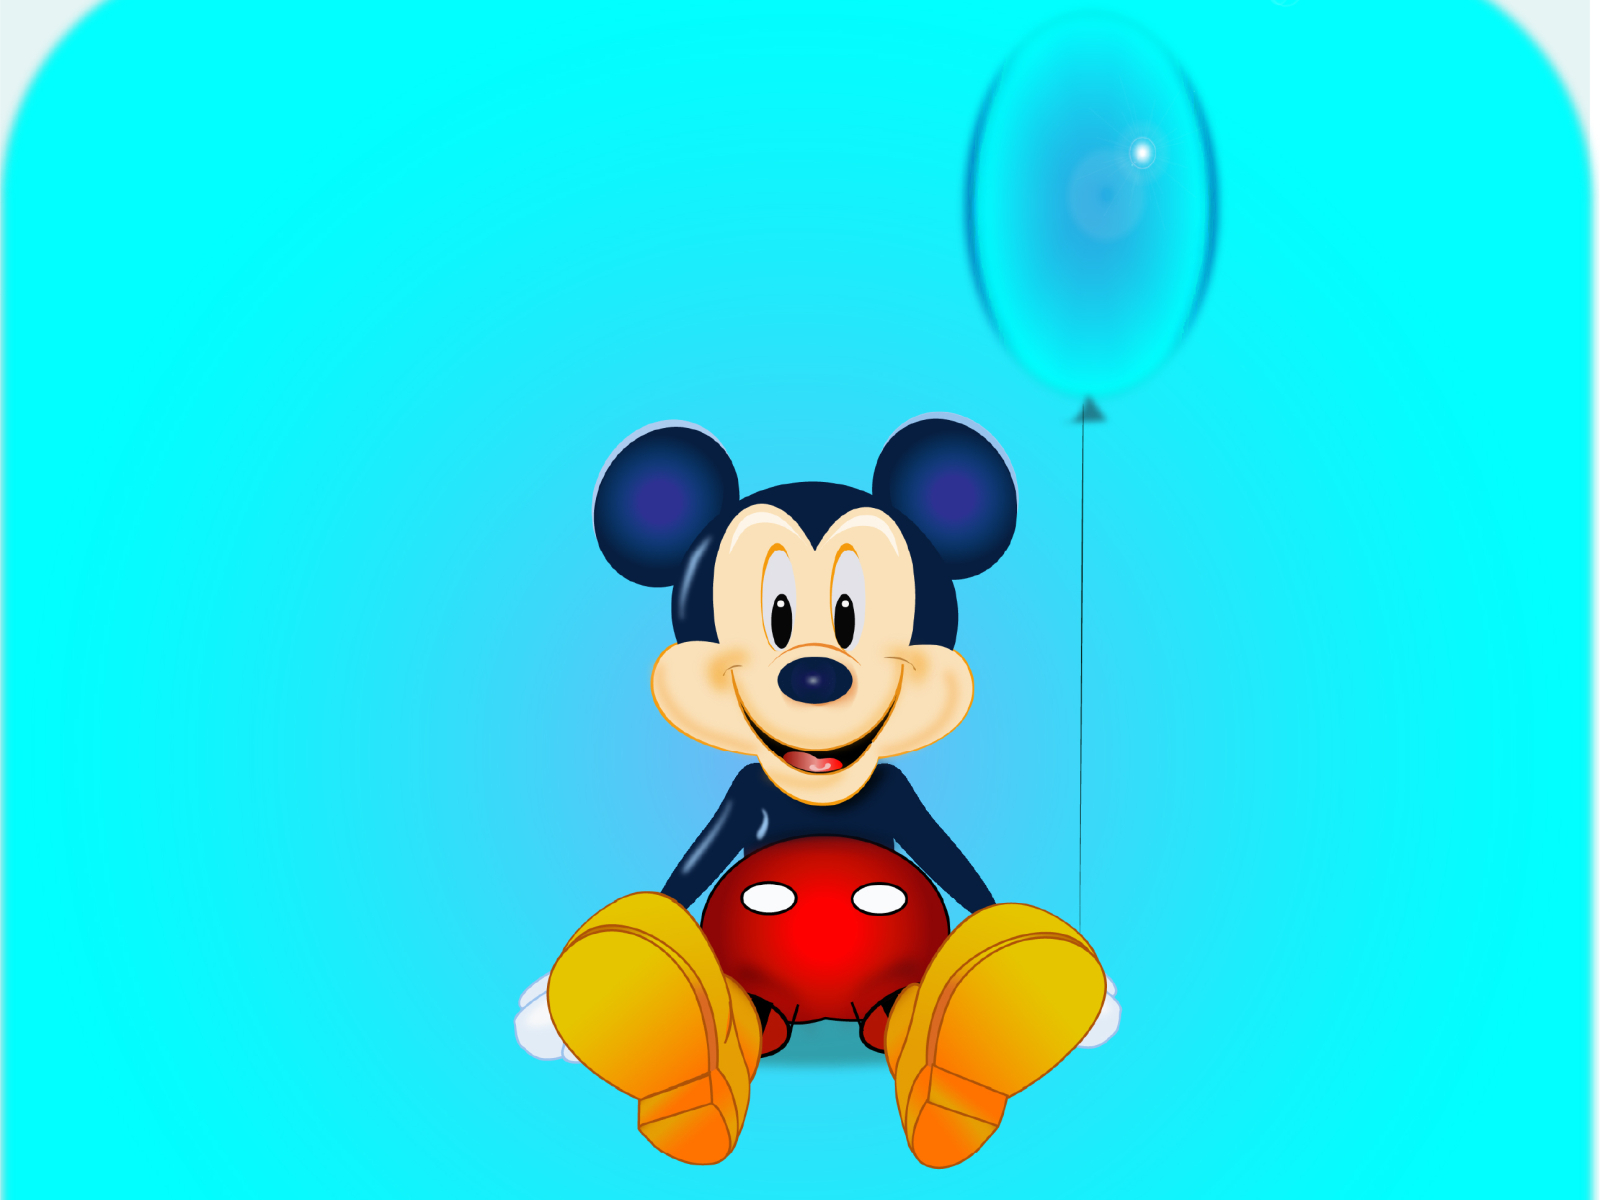 Mickey Mouse by Mihail Arhipov on Dribbble